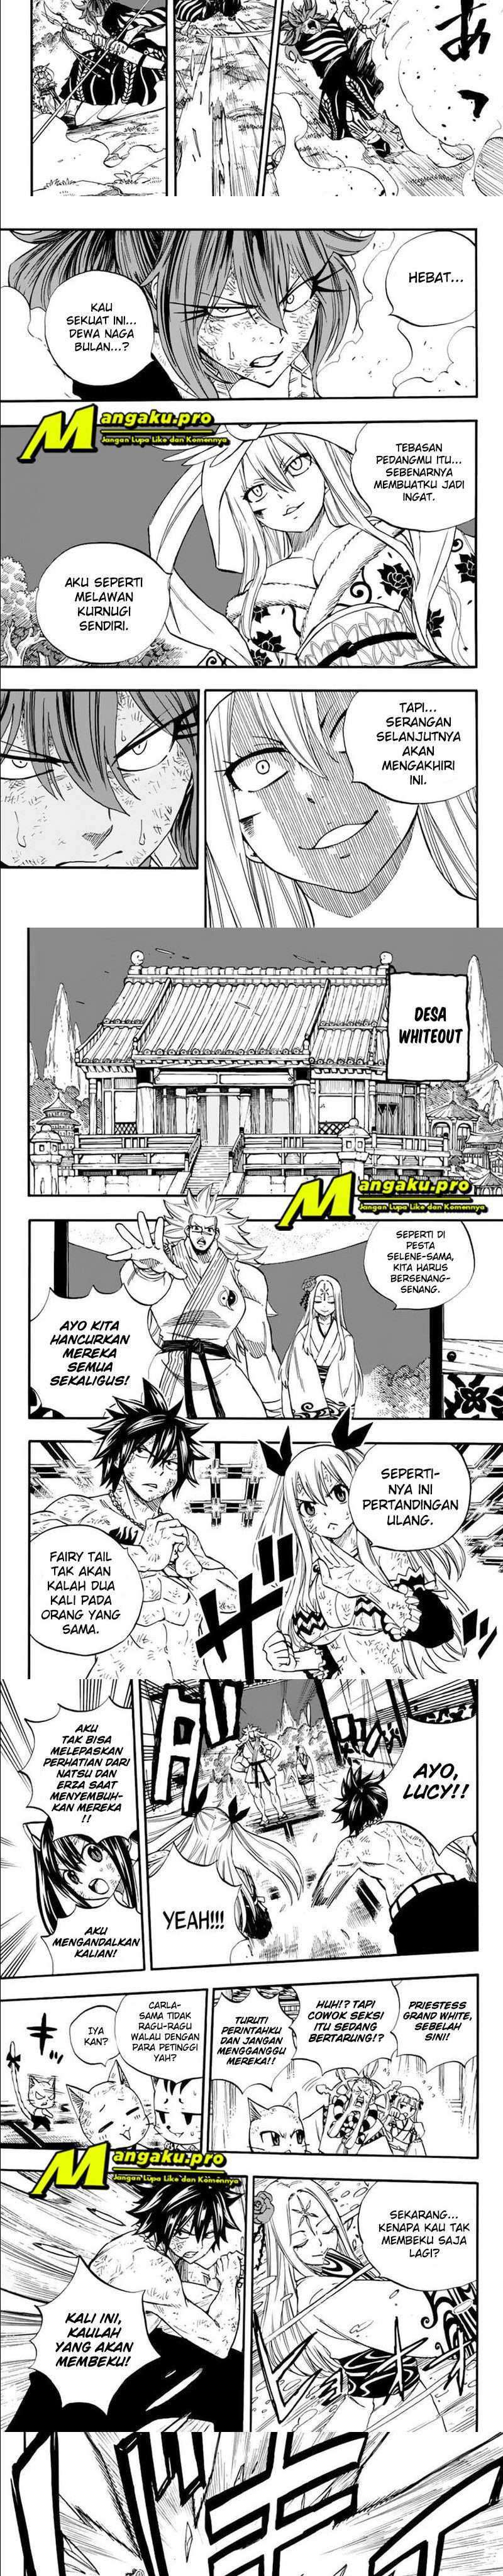 Fairy Tail: 100 Years Quest Chapter 82